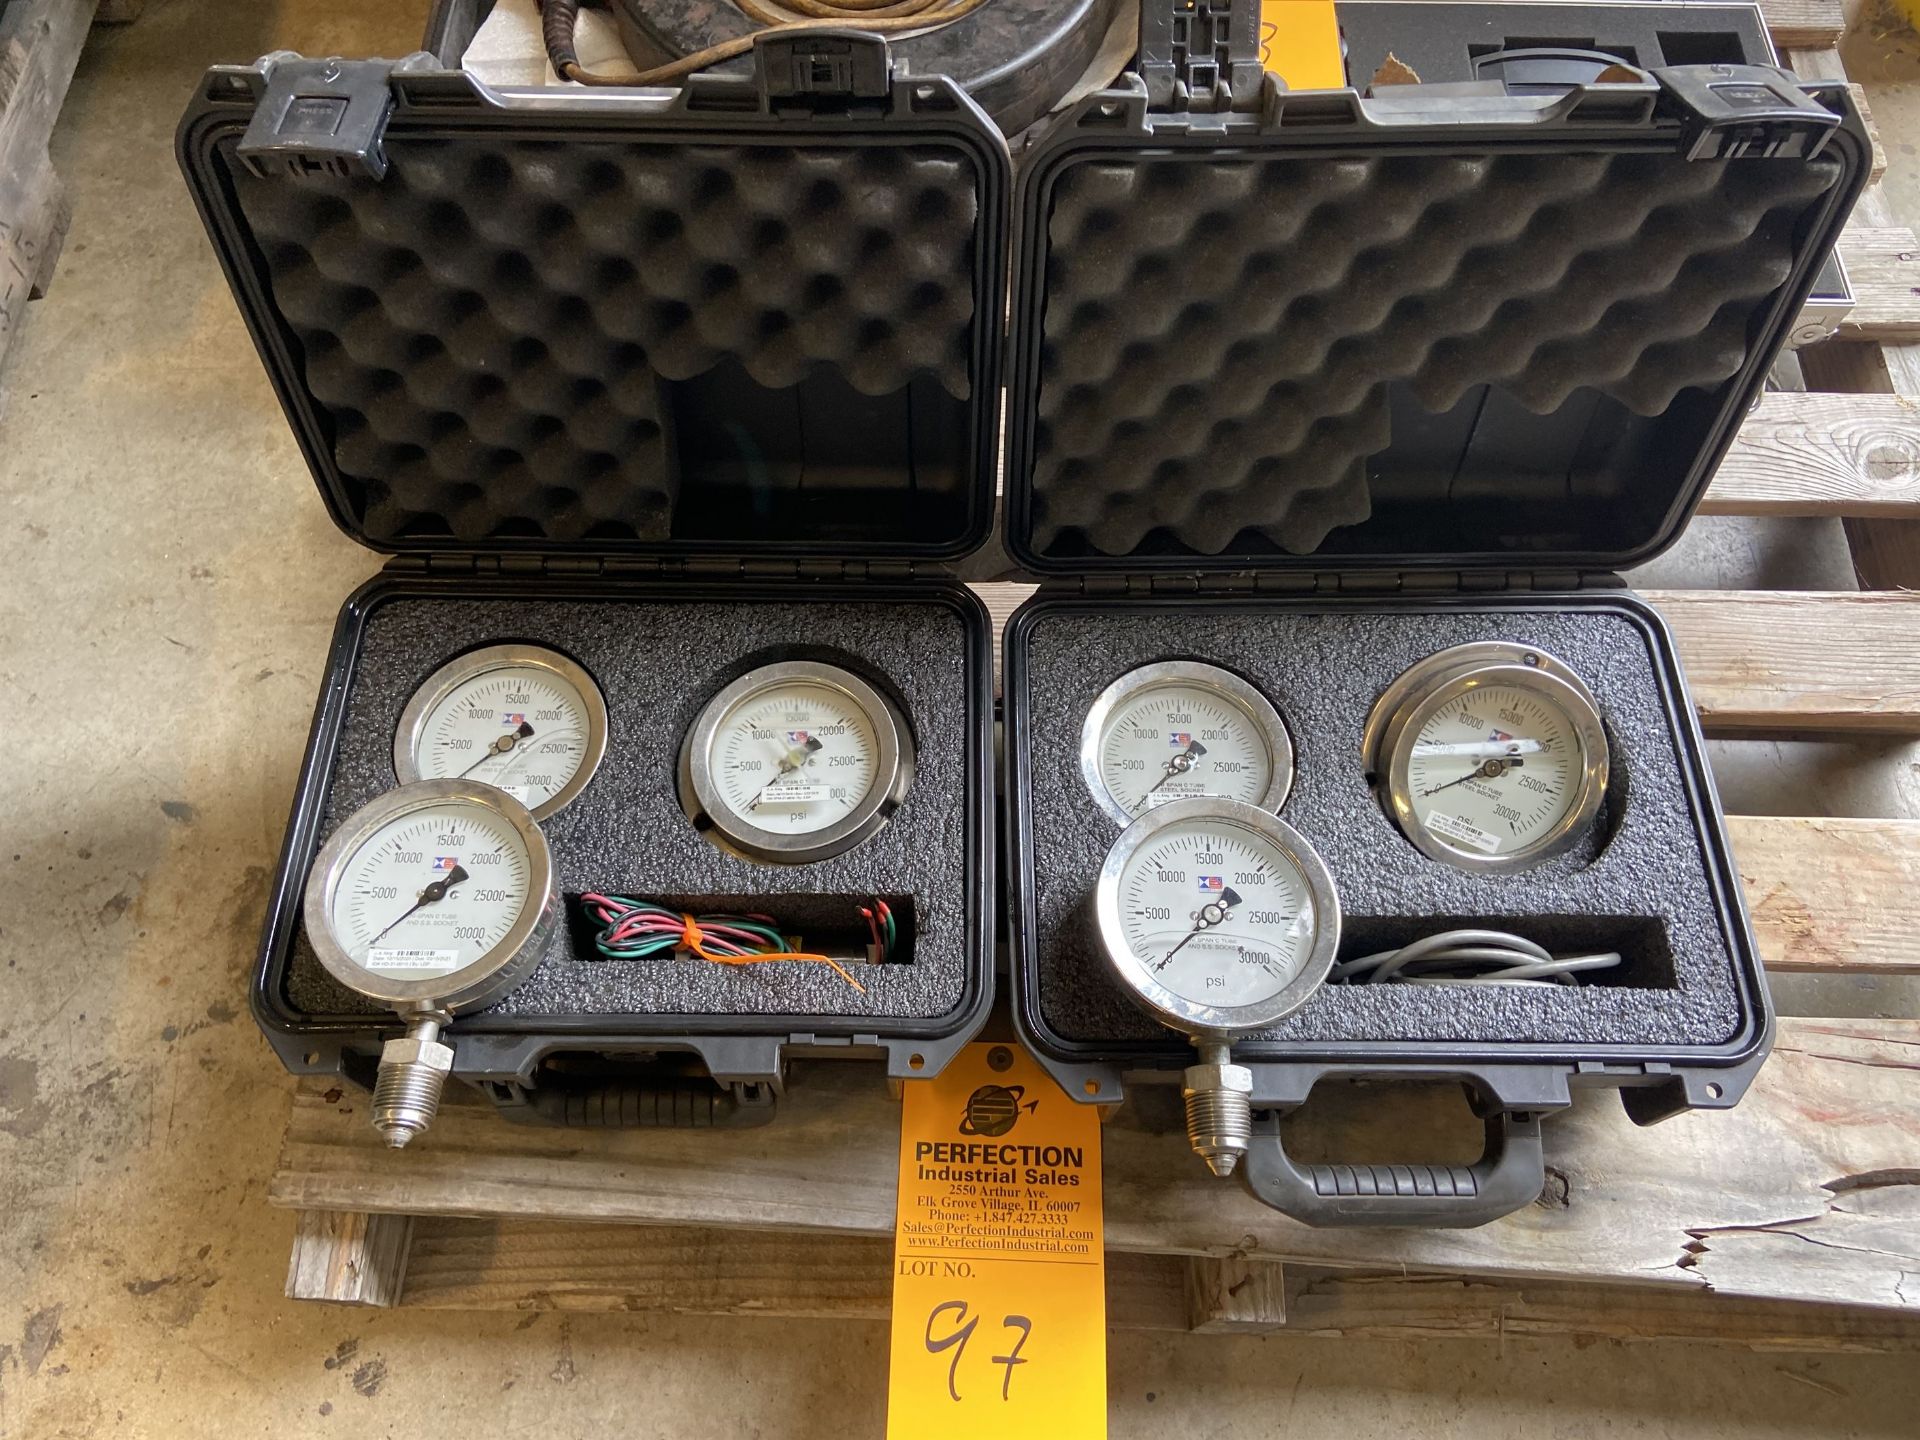 Lot of (2) Cases of High Pressure Gages